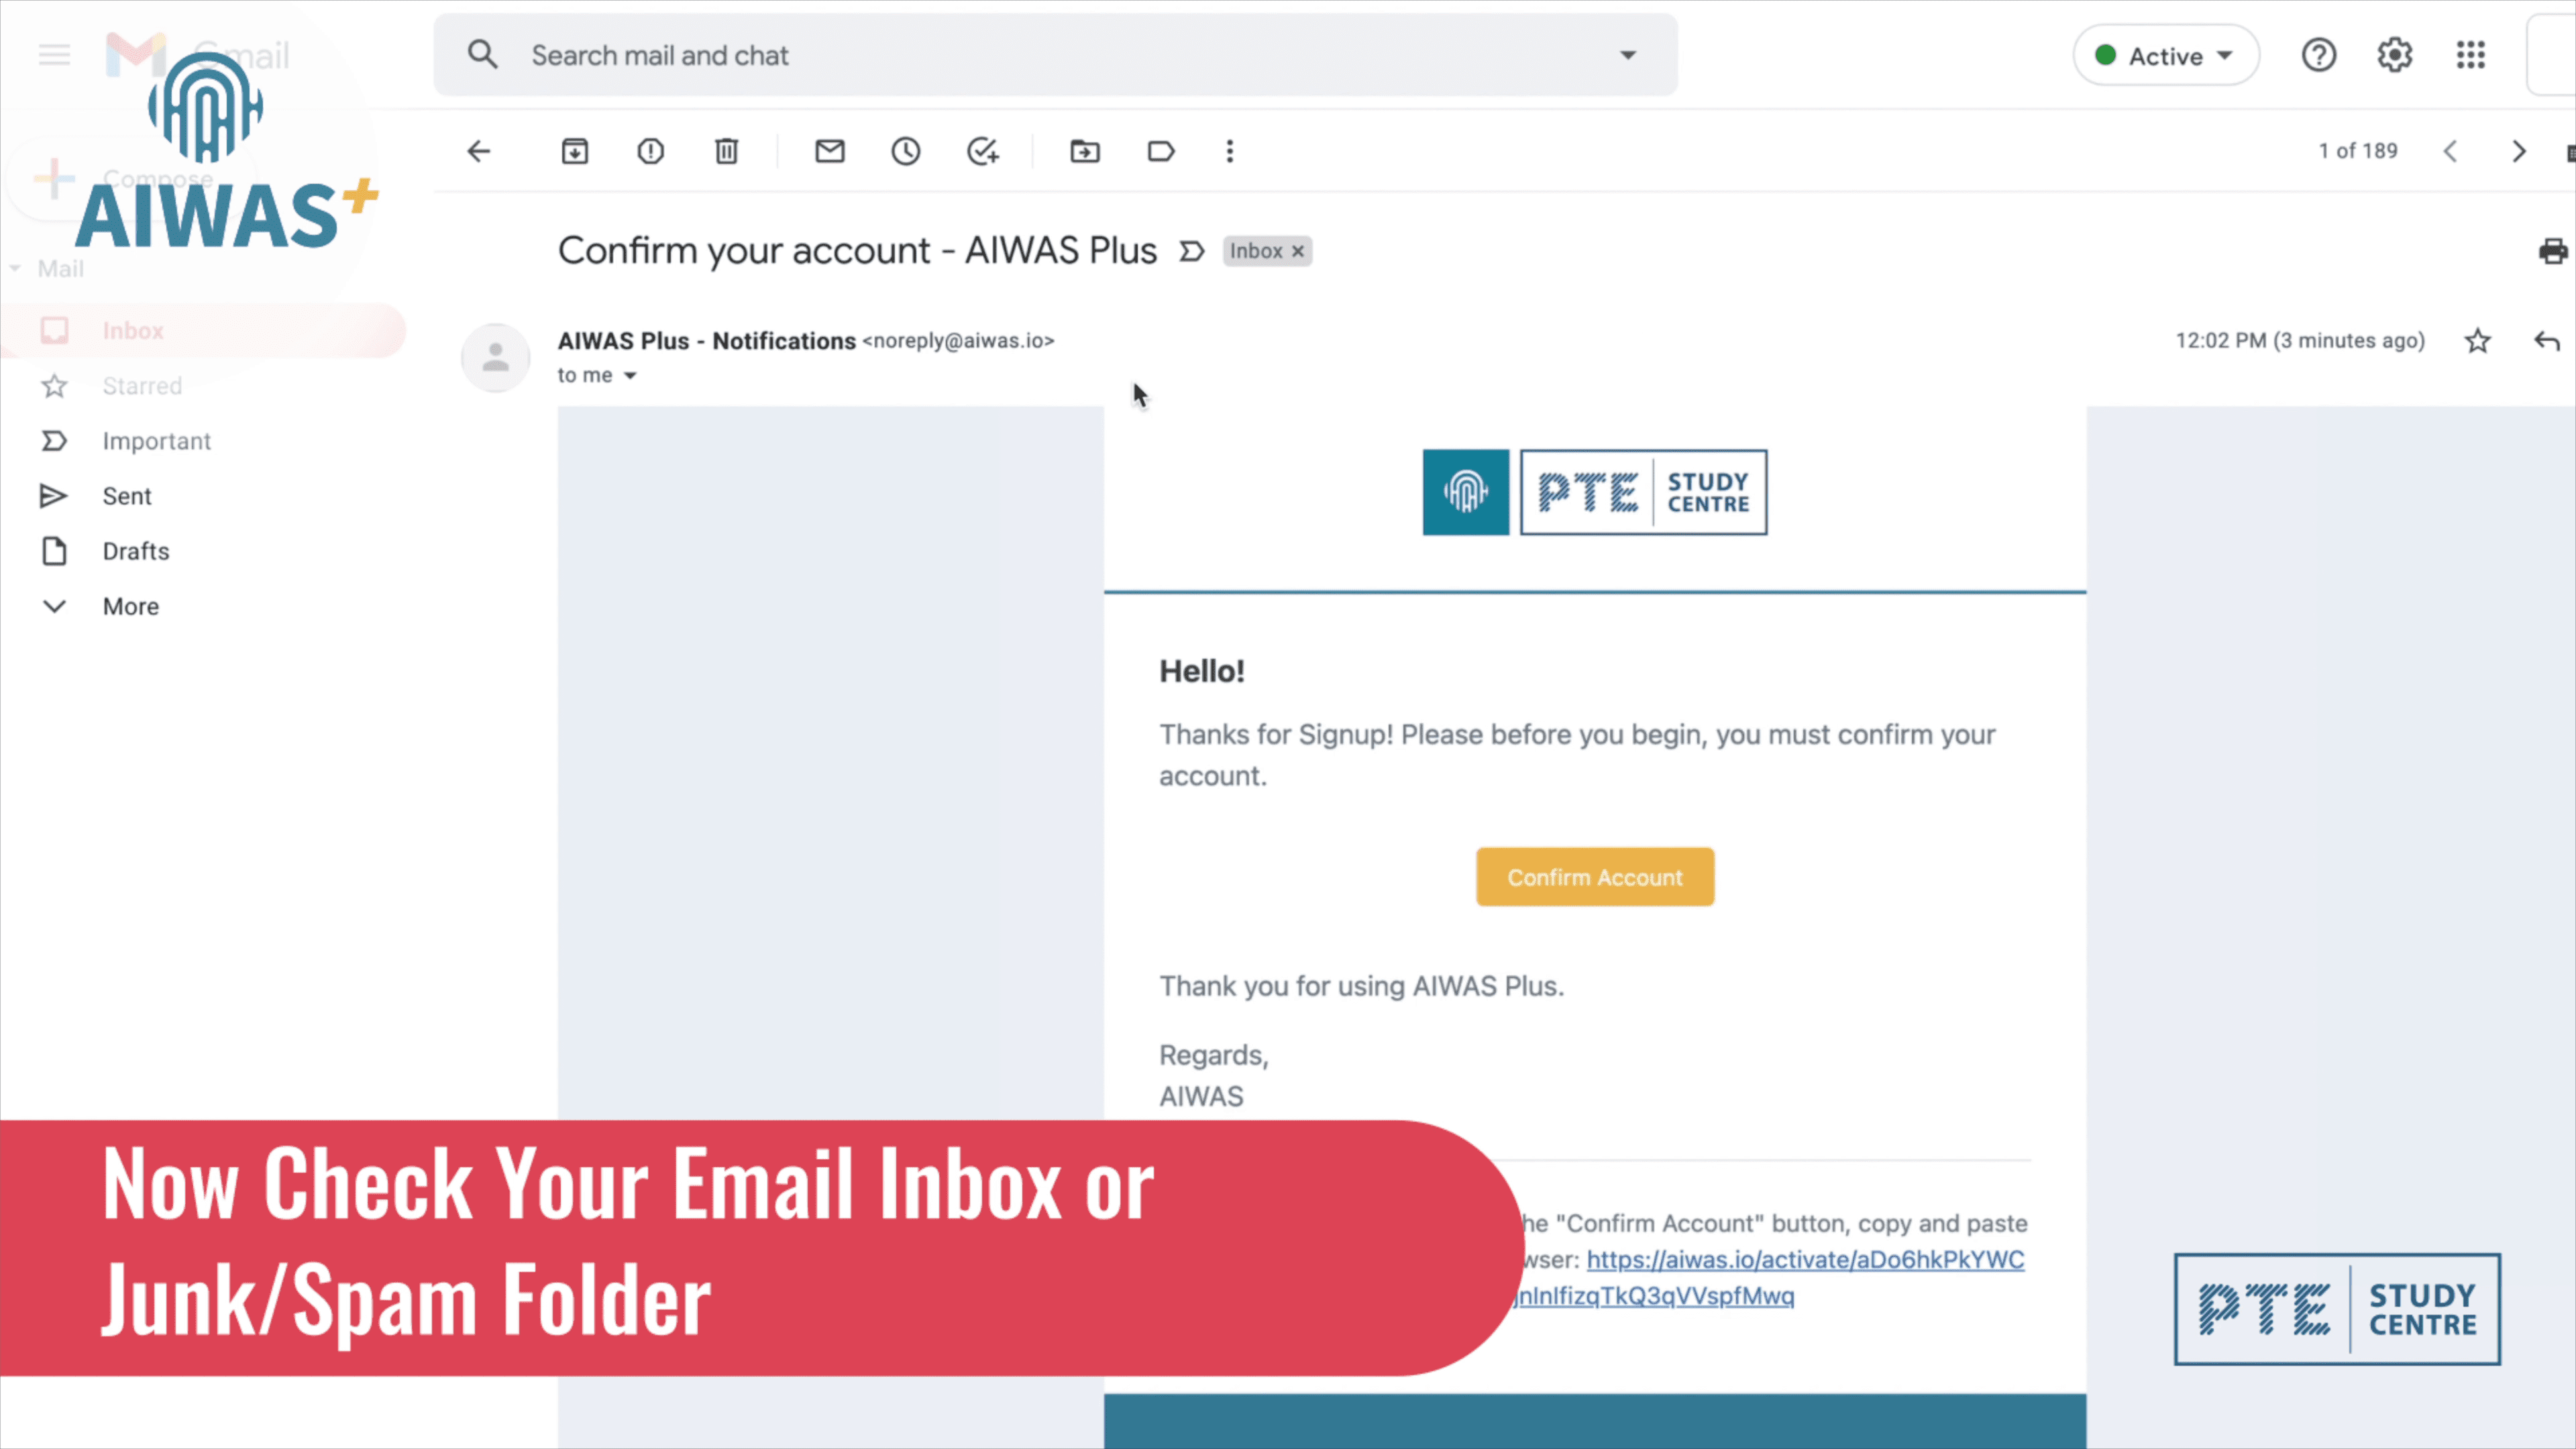 Check your email